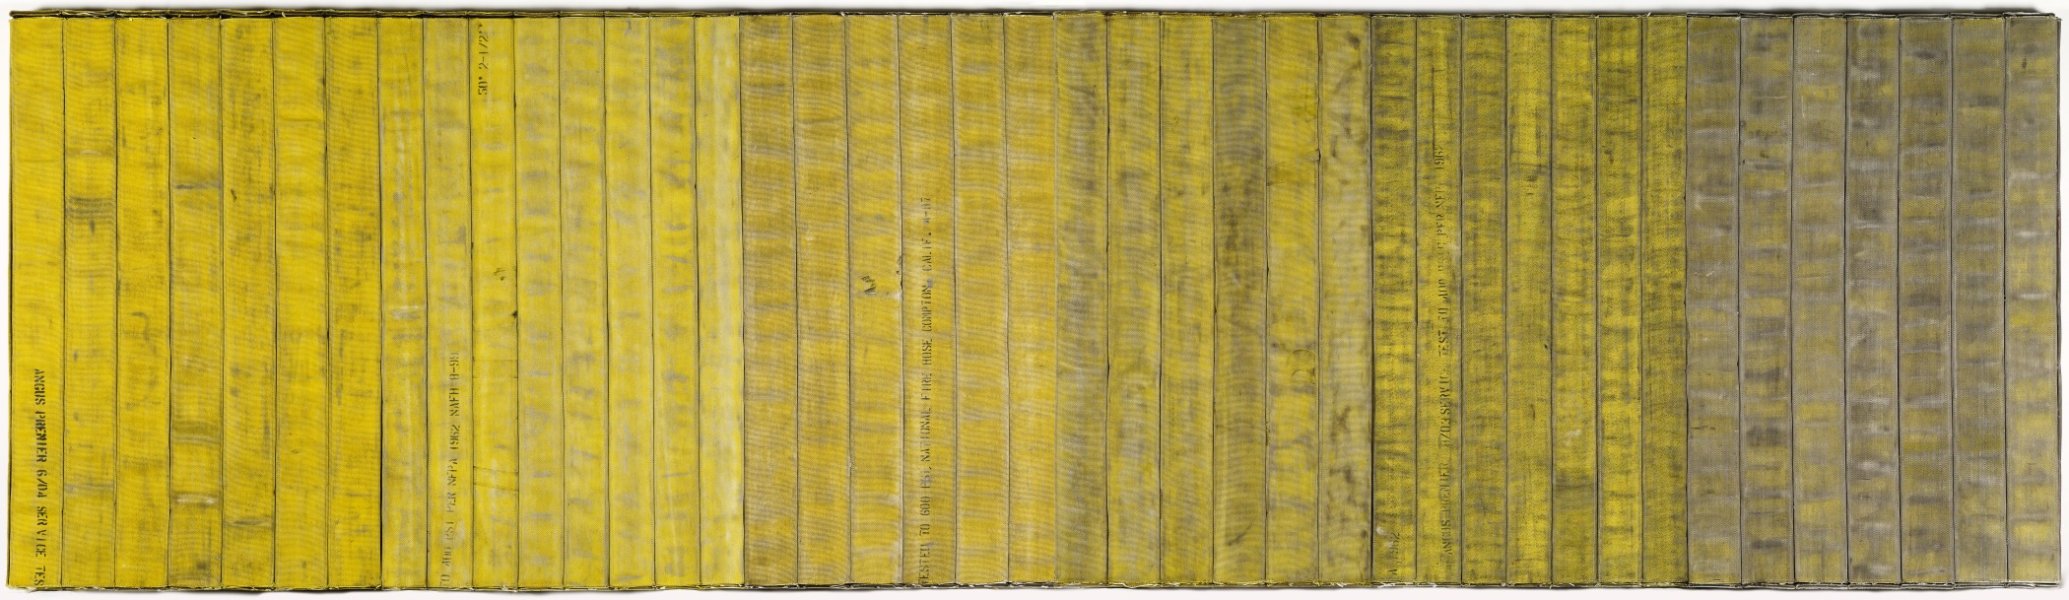 This large-scale wall-mounted sculpture features forty-one sections of fire hose of equal size laid vertically side-by-side. From left to right, the sections of fire hose progressively appear more worn. The dominant color of the fabric gradually transitions from yellow to tones of gray. Some sections of the fire hose are stamped with black letters spelling out the original manufacturer specifications.